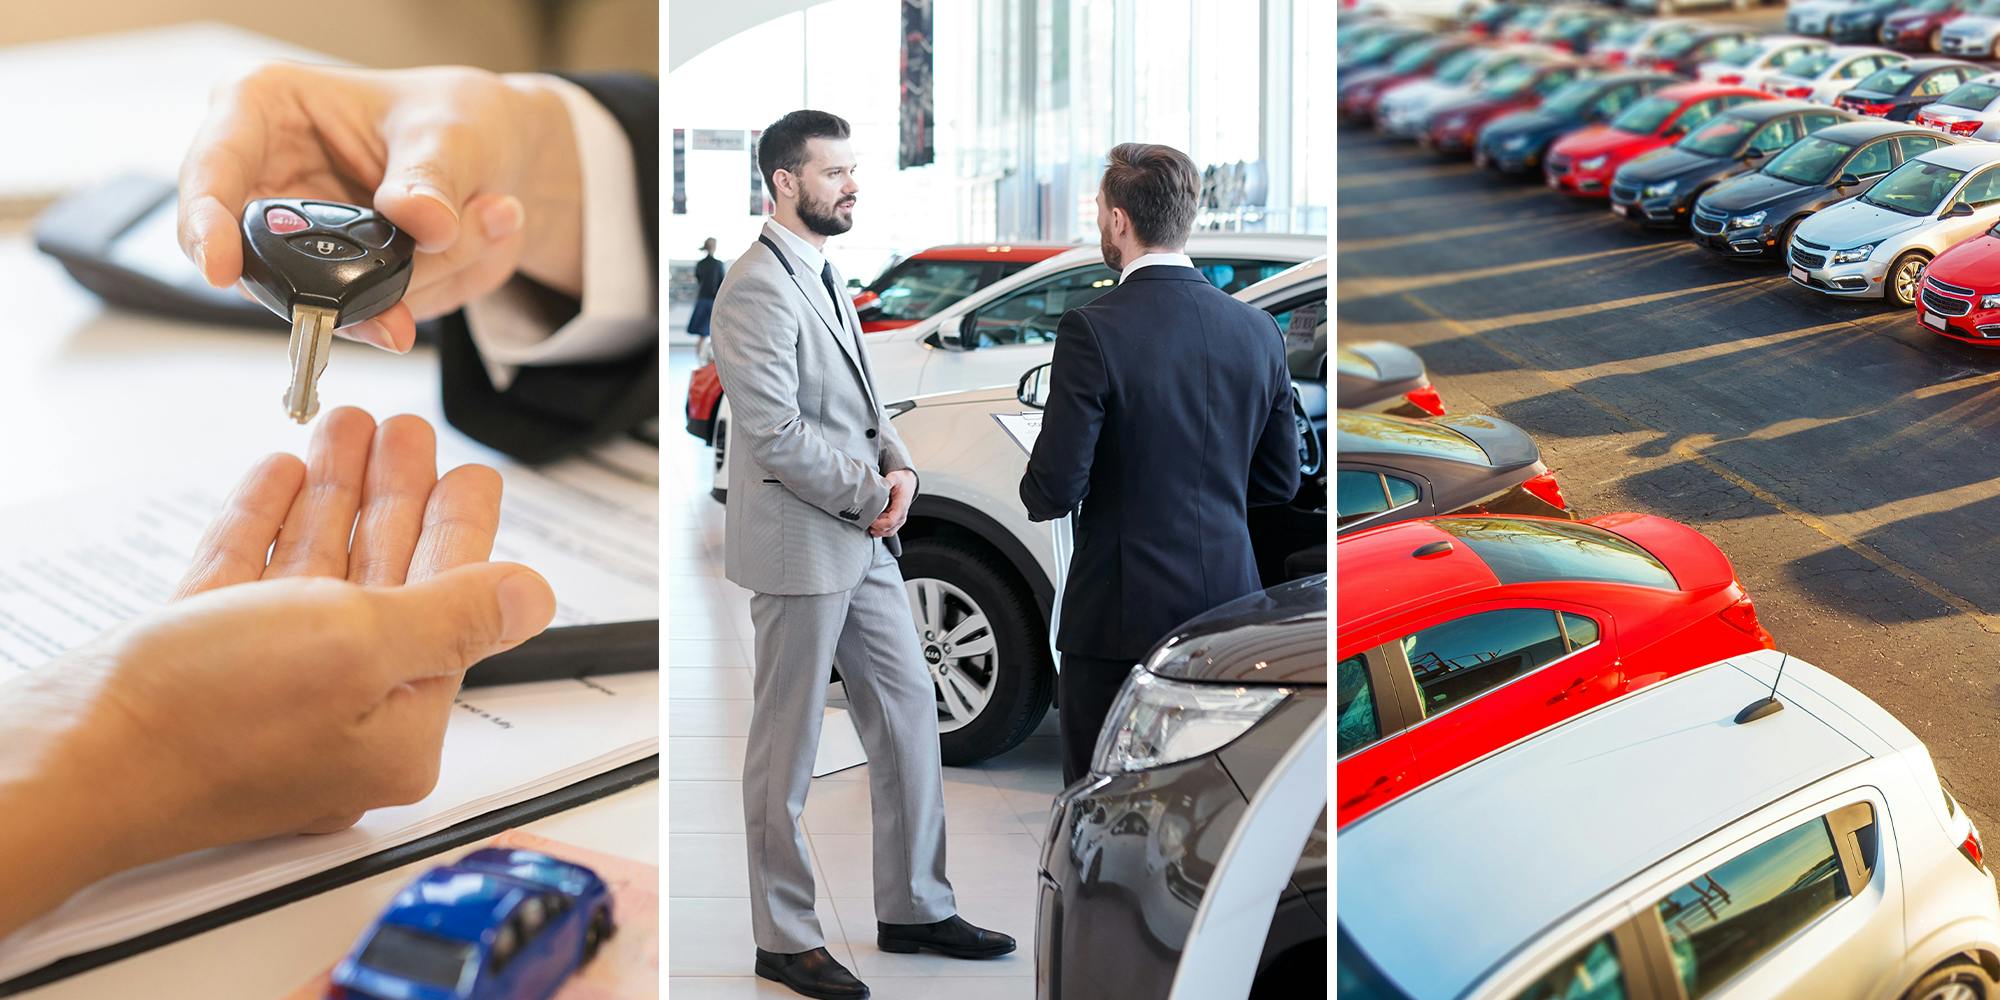 Expert exposes how car dealers try to 'confuse you' when trying to negotiate price